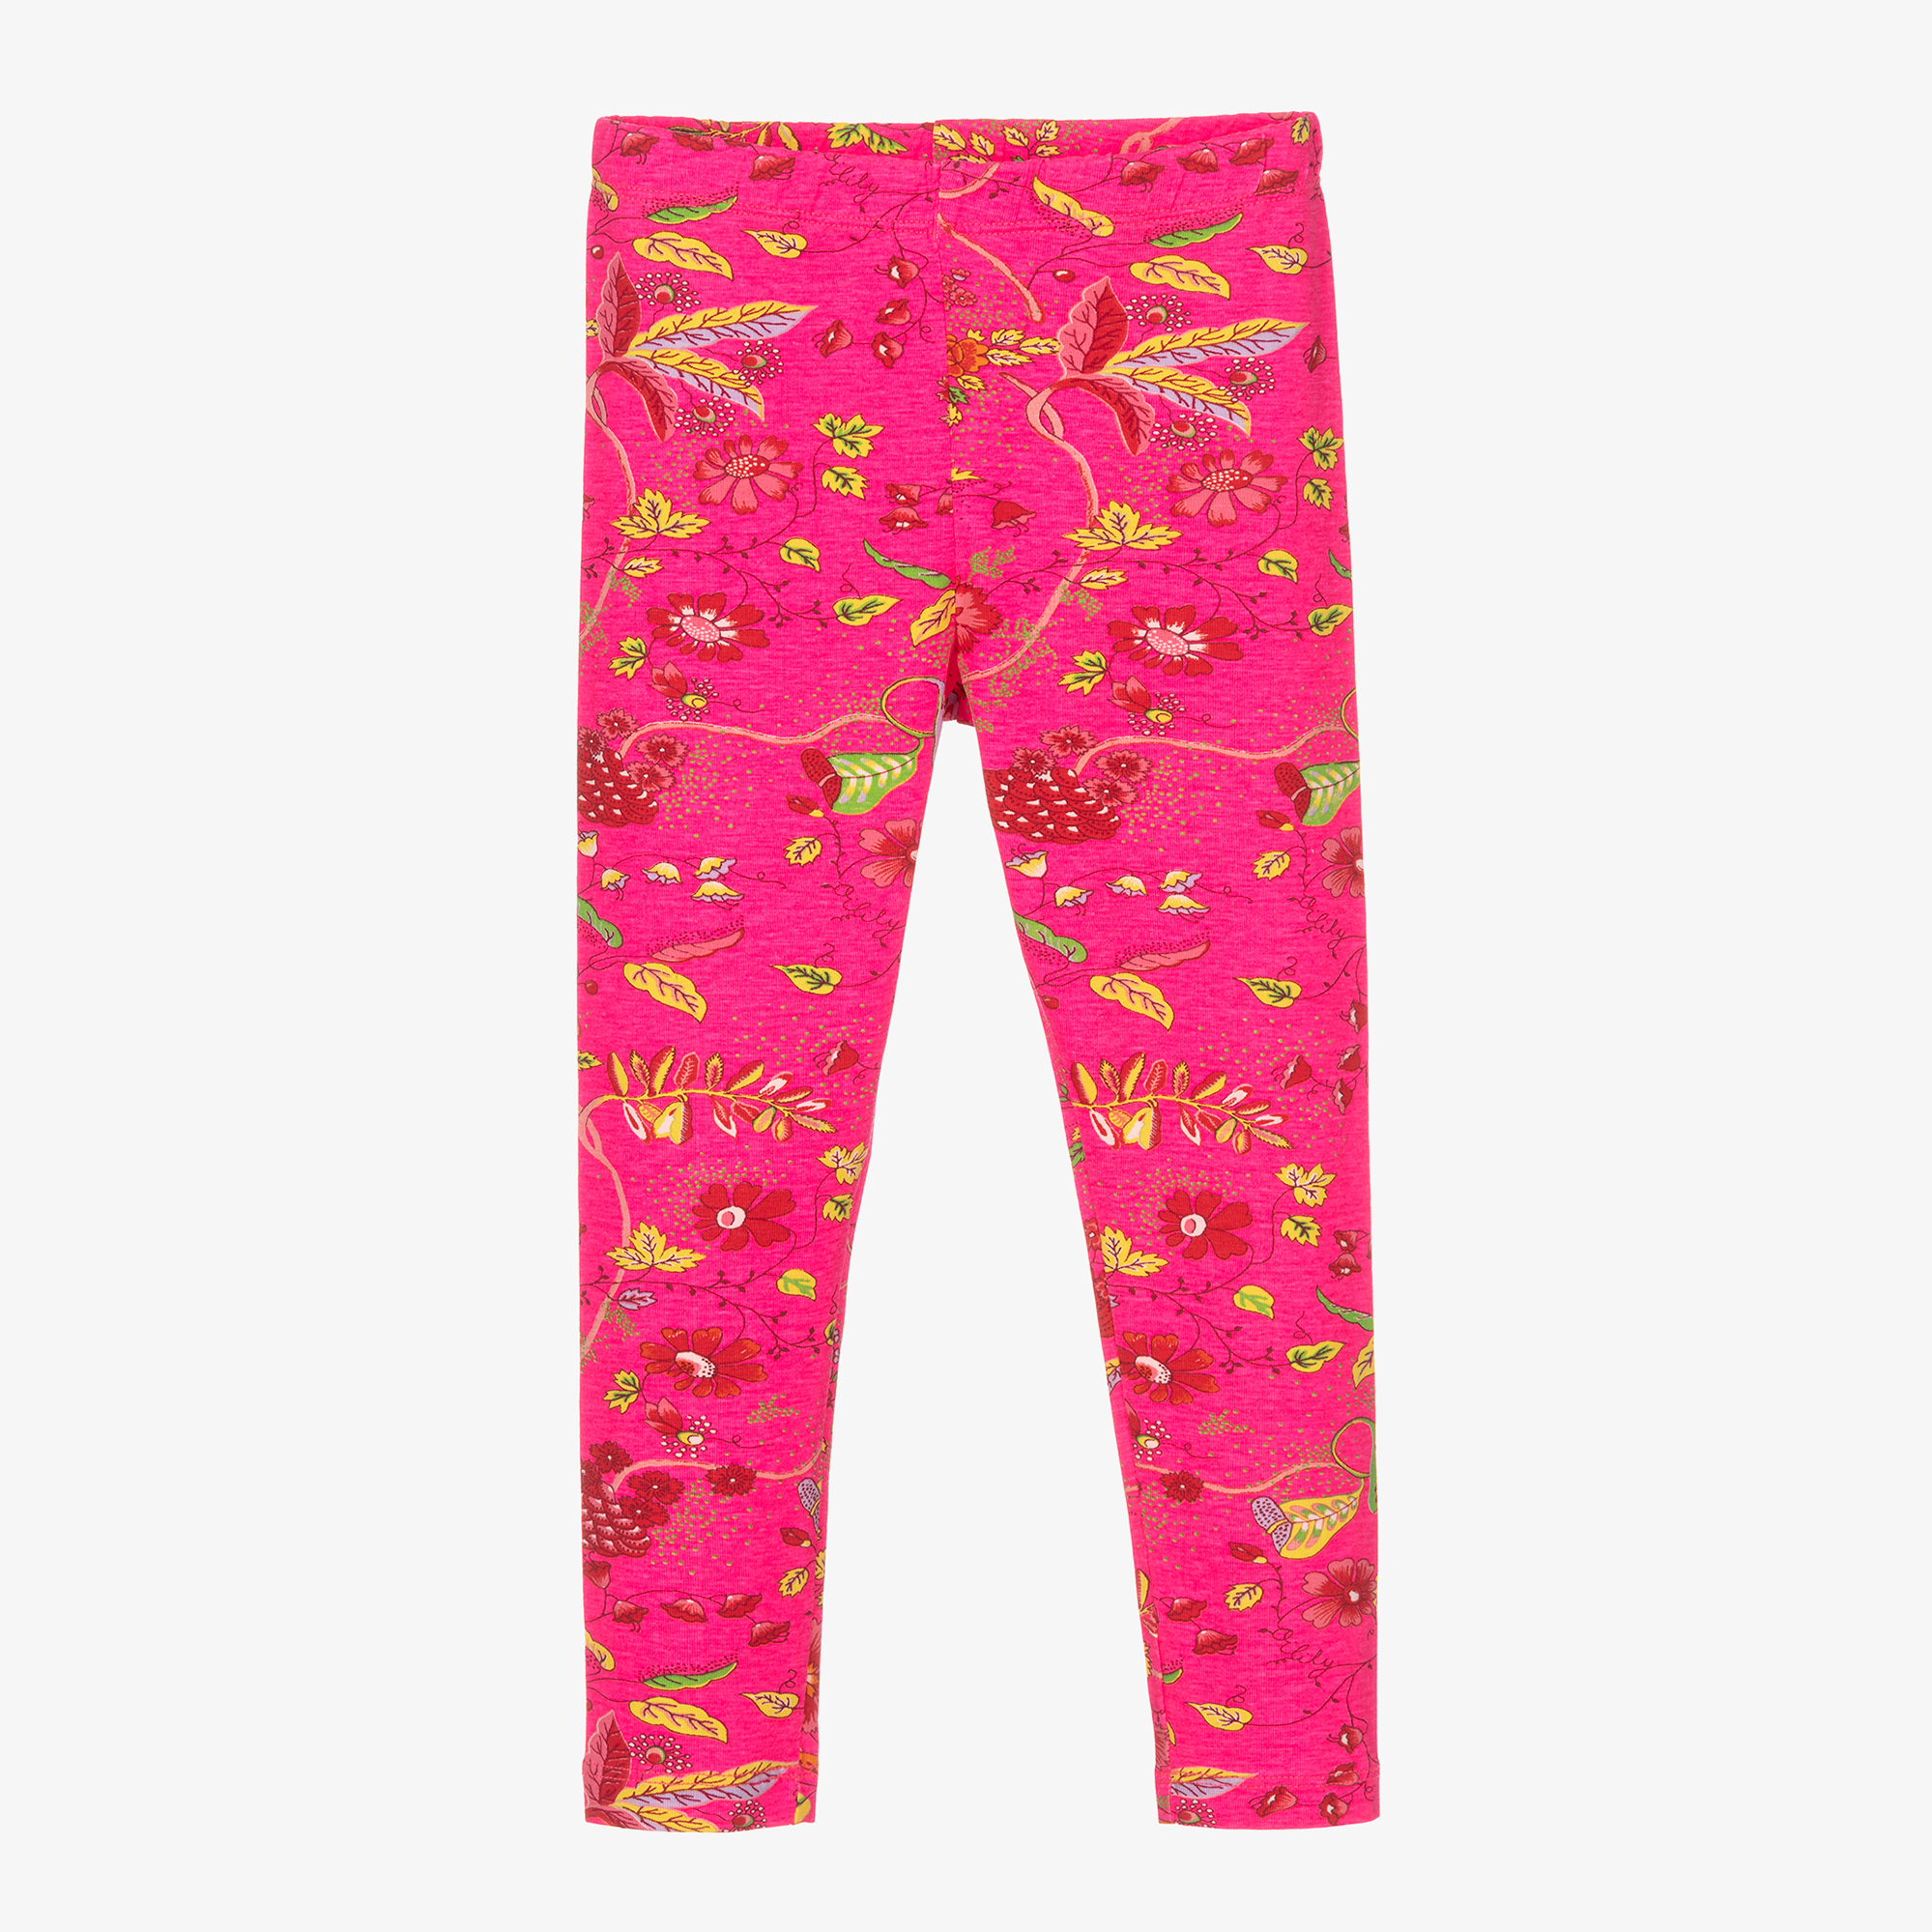 Oilily - Green & Red Floral Leggings | Childrensalon